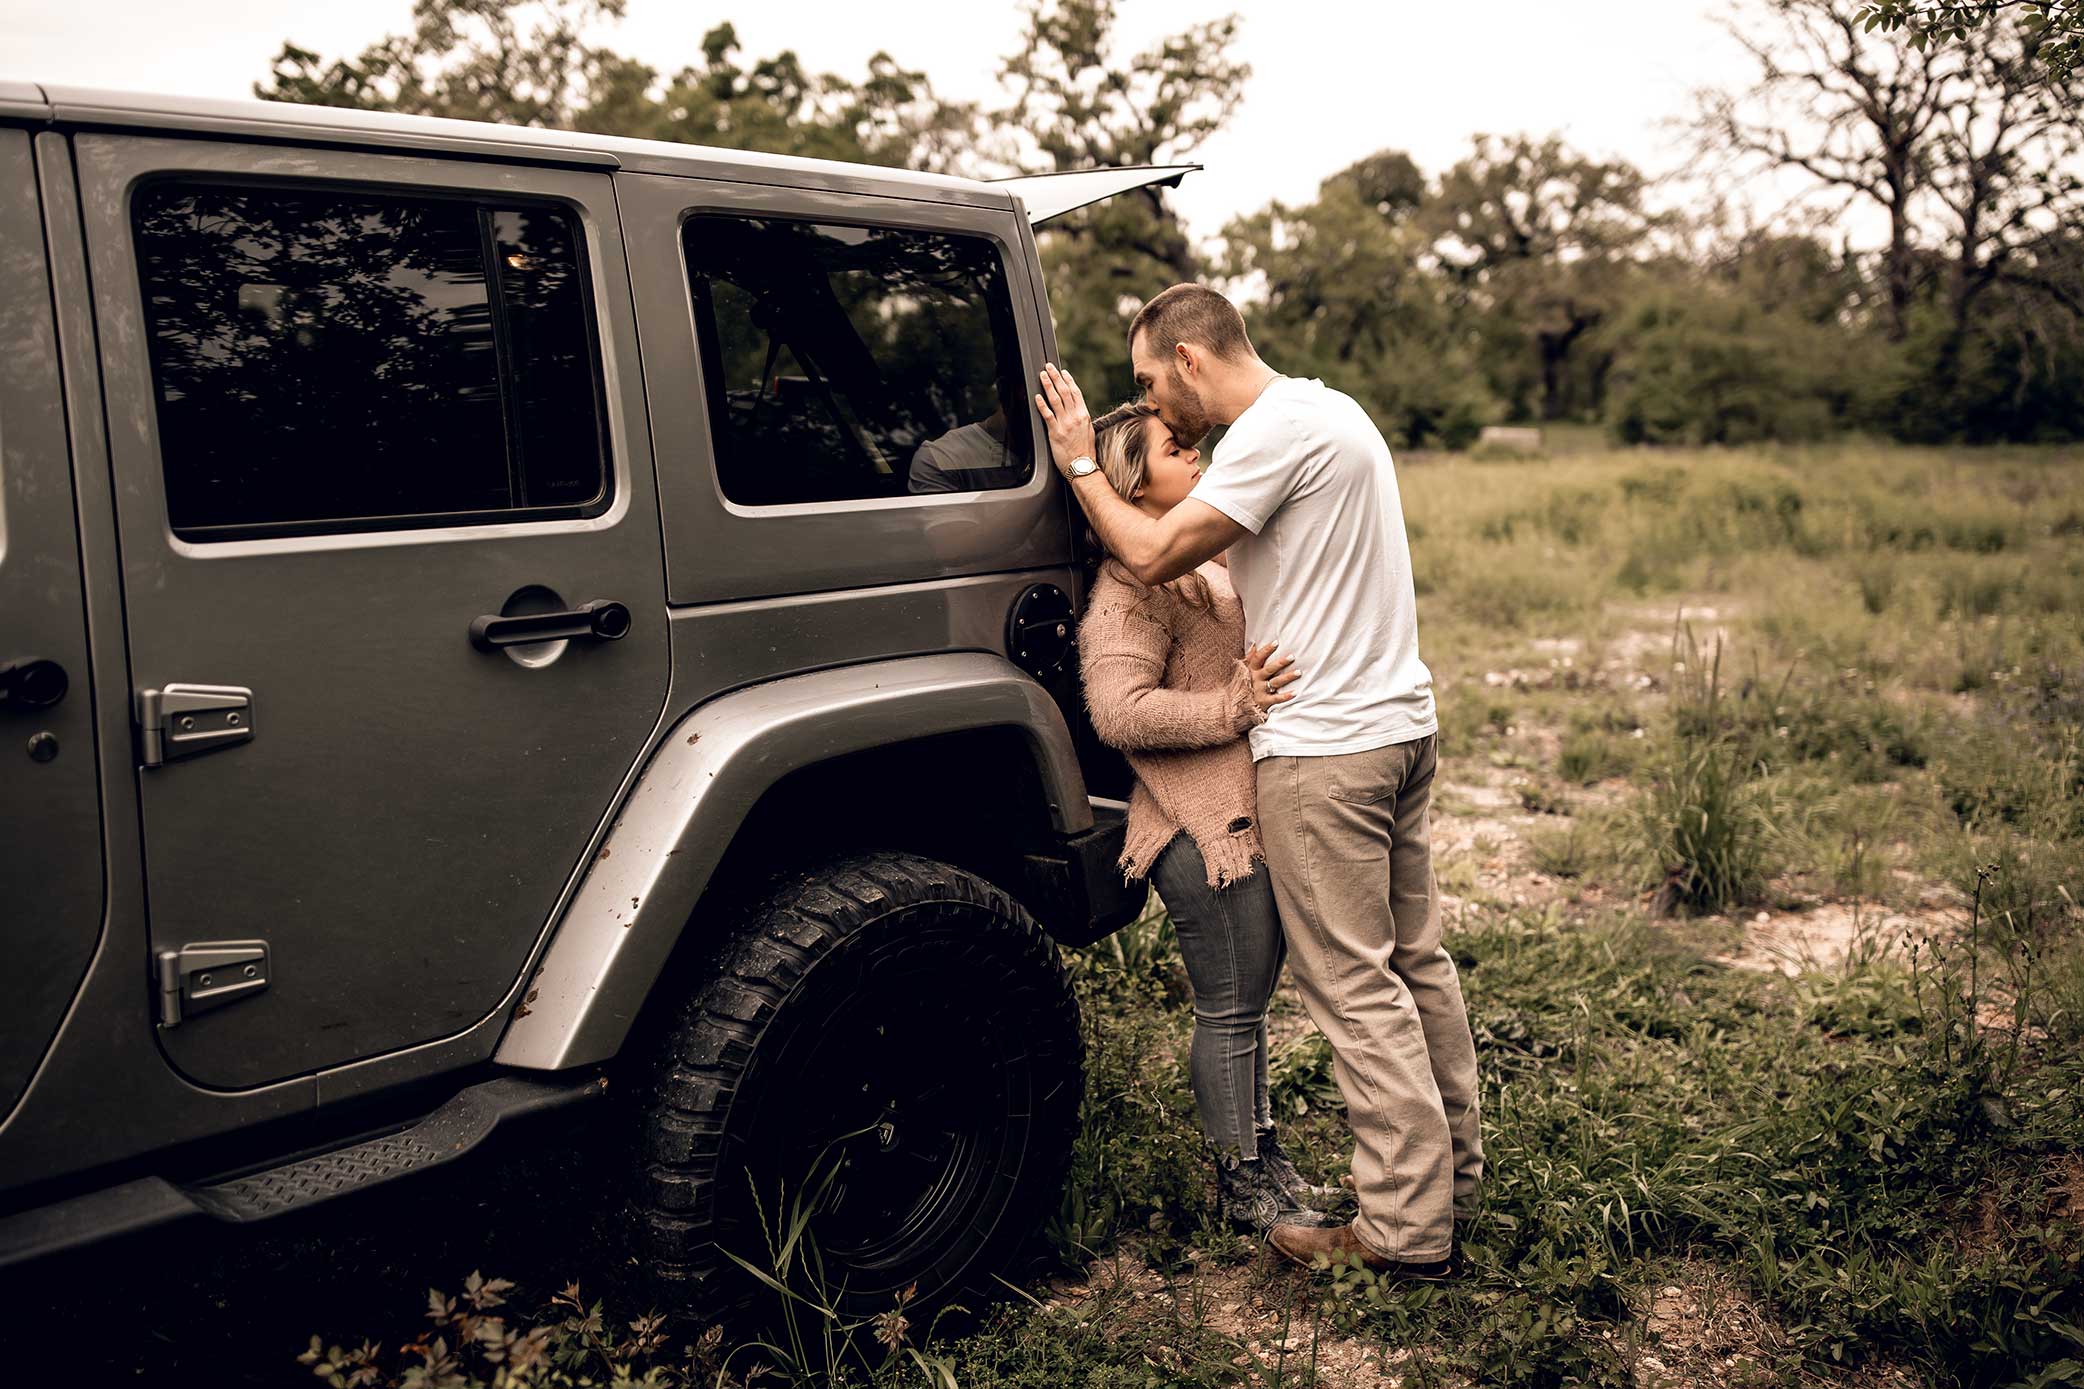 shelby-schiller-photography-lifestyle-couples-remi-colt-outdoor-jeep-adventure-36.jpg